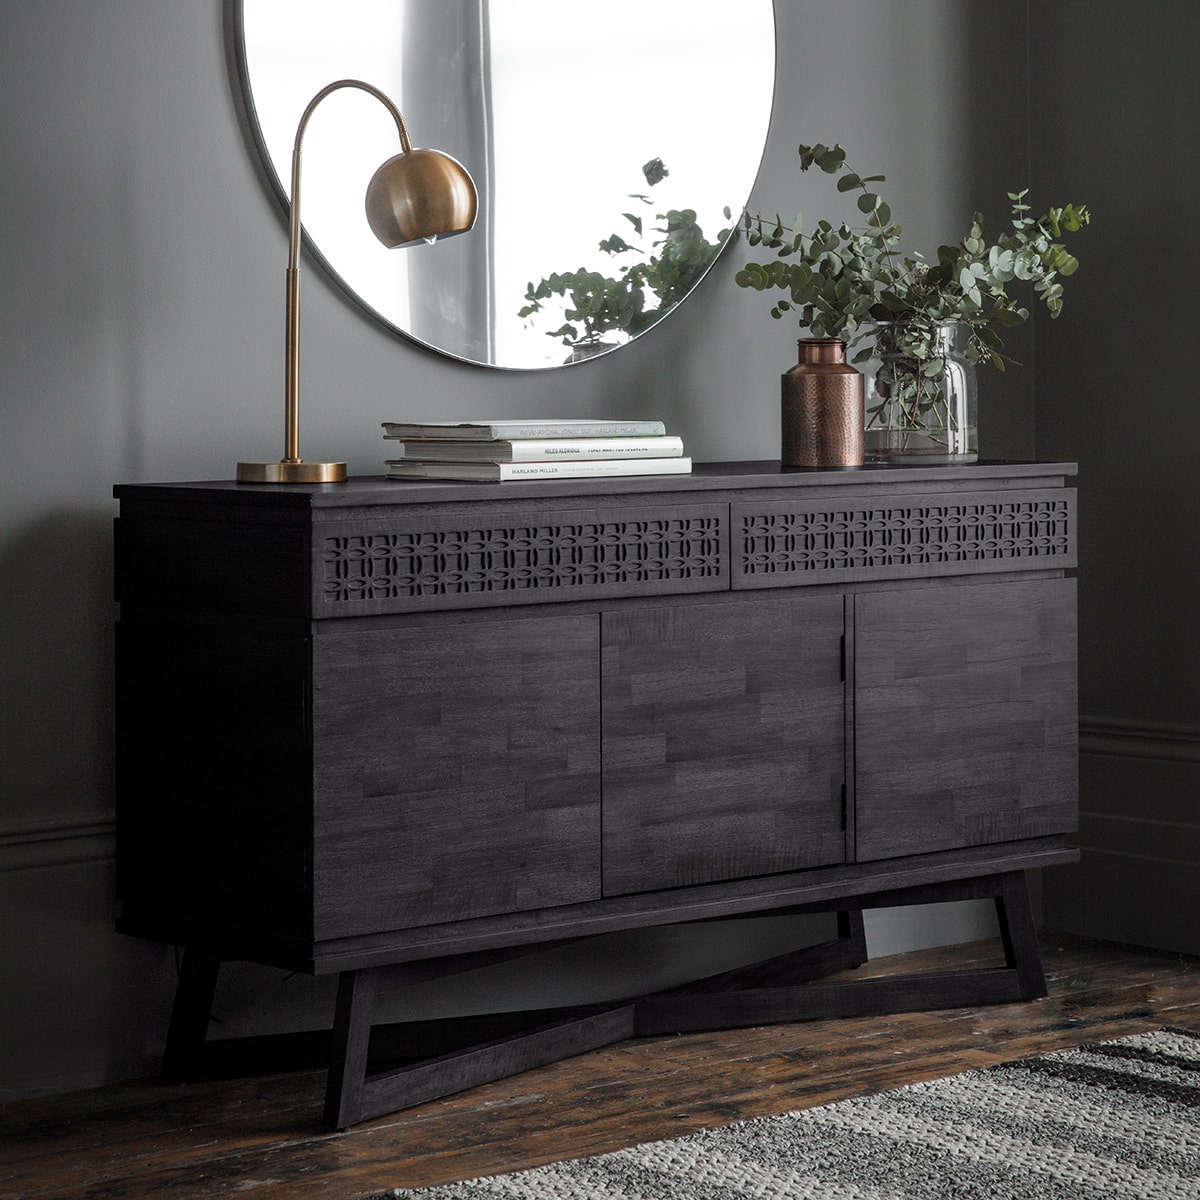 Magnificent black sideboard with 2 drawers and 3 cupboards of storage is shown in the room setting with decor. The front of the drawers has a stunning frieze of the blind fretwork and the drawers are made with mixed wood veneers put together in a mosaic manner shimmering in the light,. 